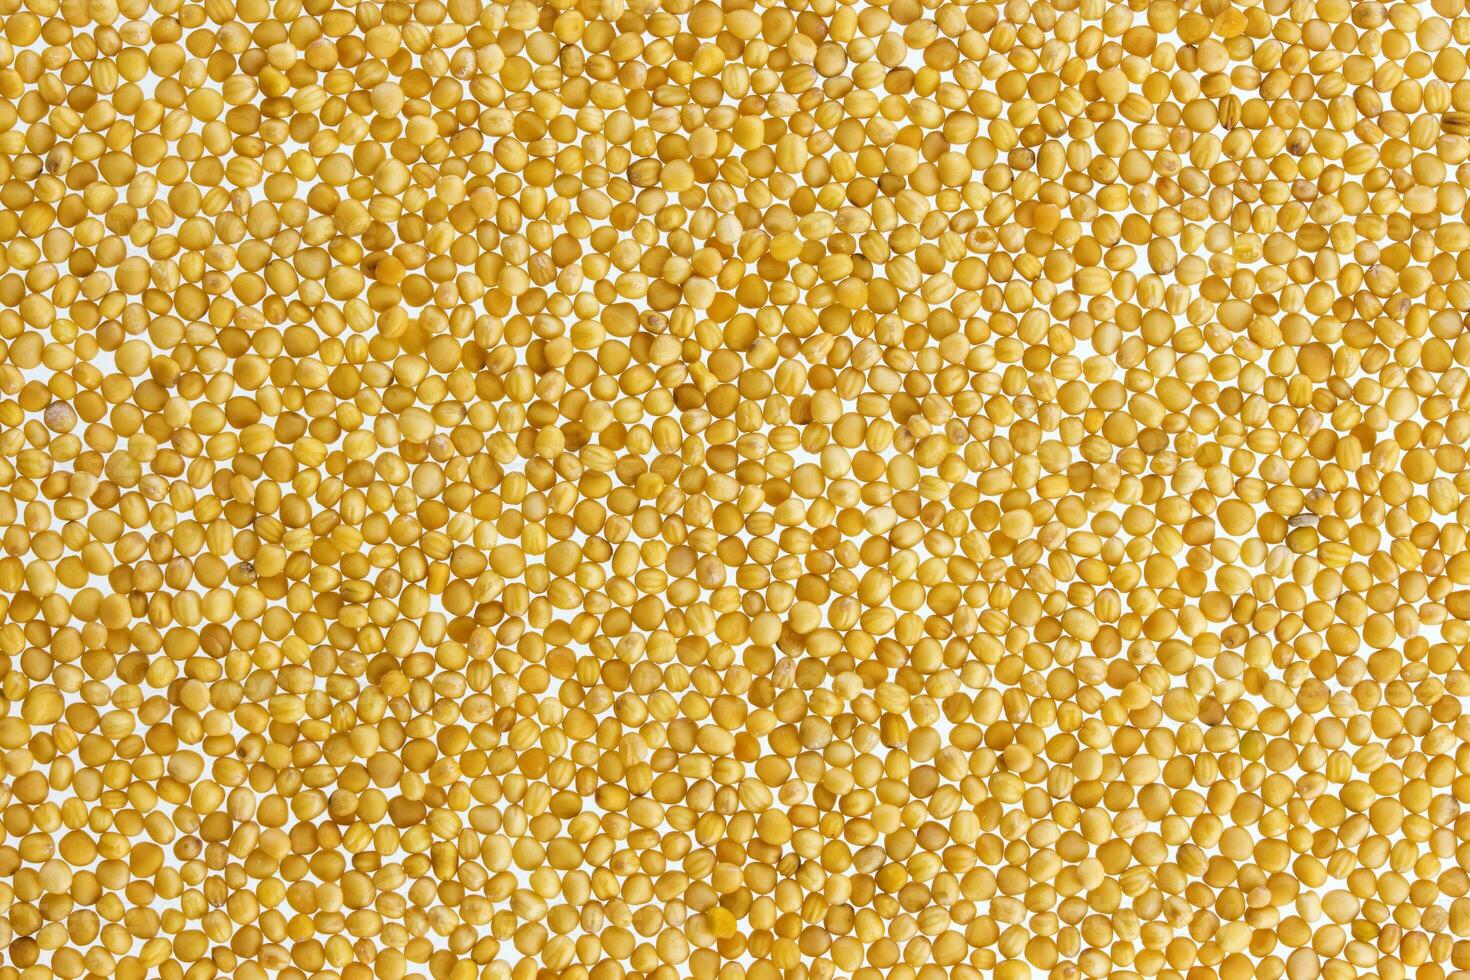 Yellow mustard seeds texture or background photo